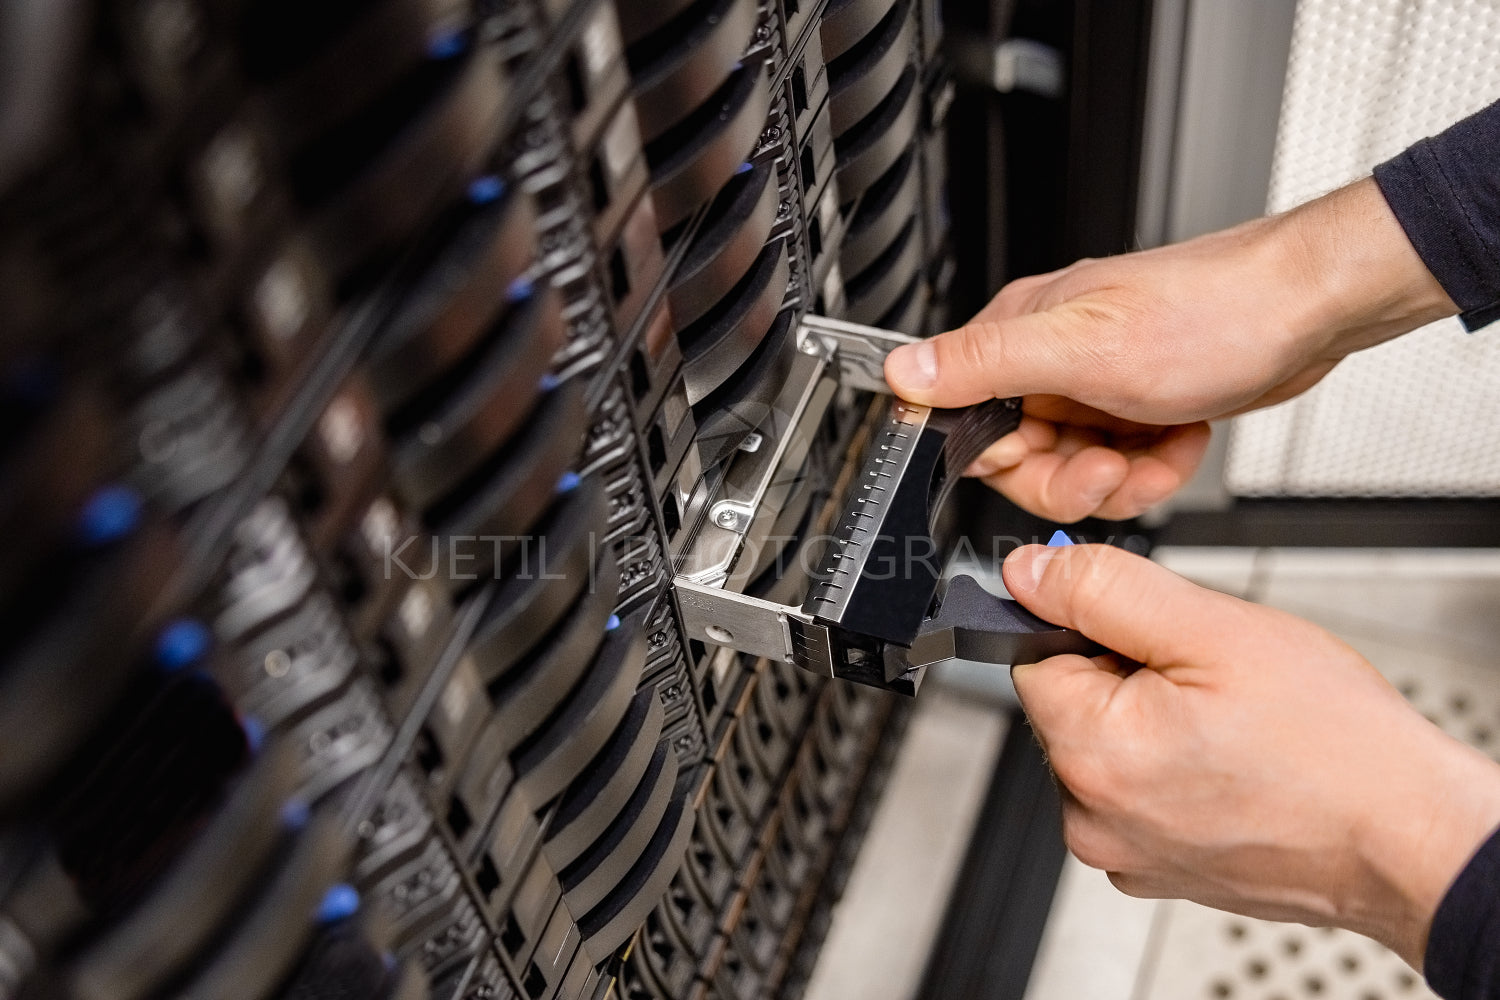 Male Technician Replacing Server Drive At Datacenter